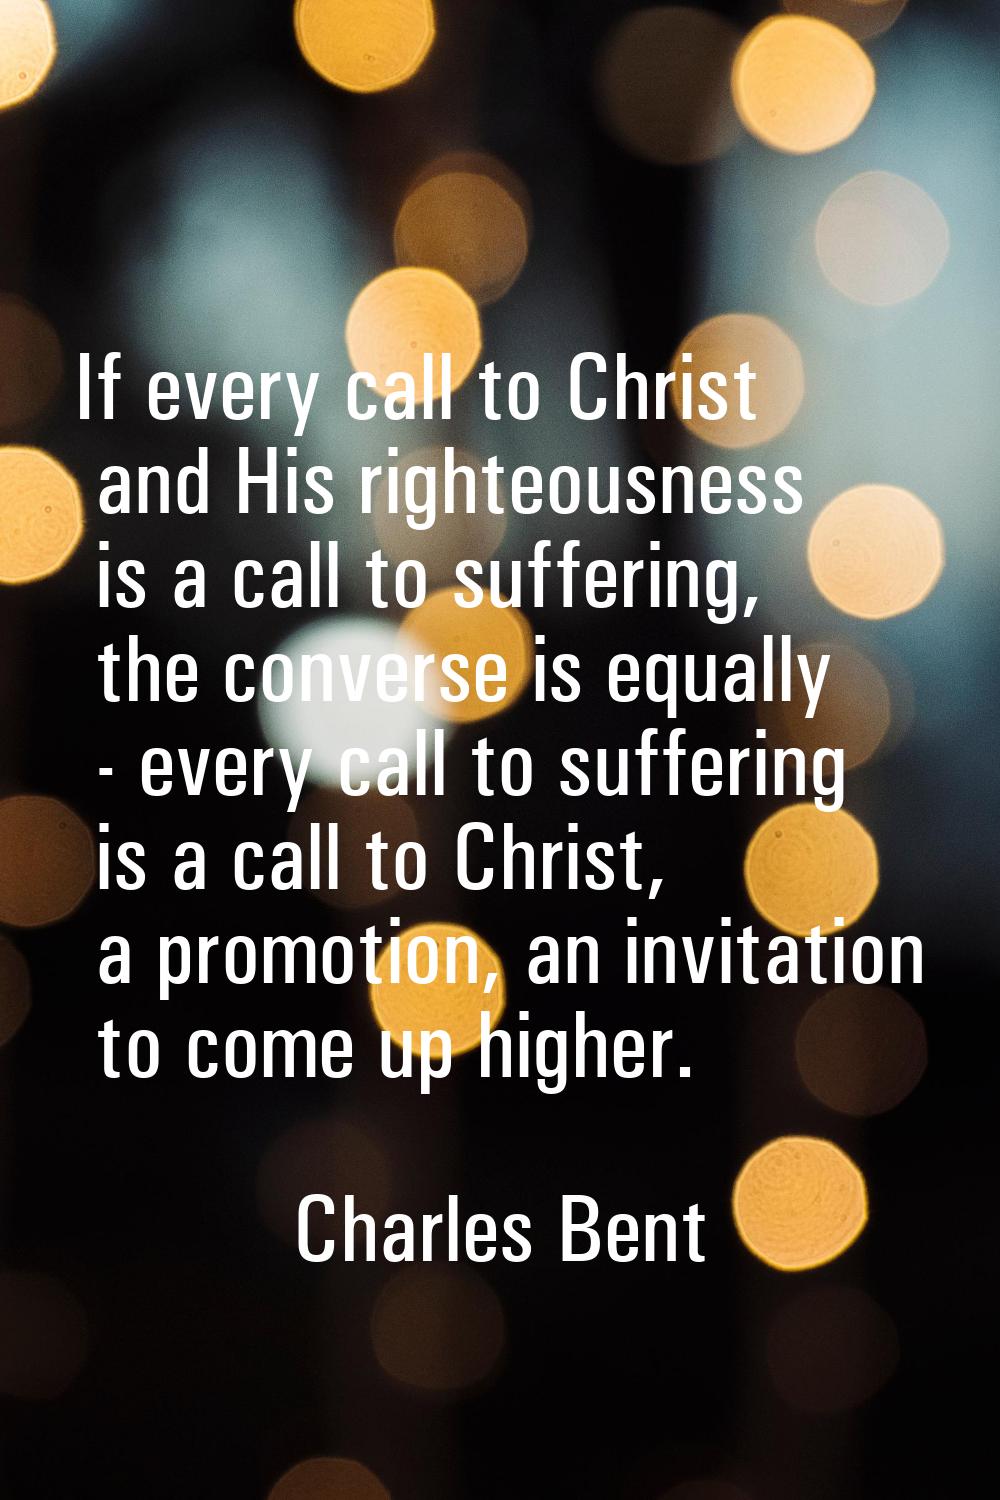 If every call to Christ and His righteousness is a call to suffering, the converse is equally - eve